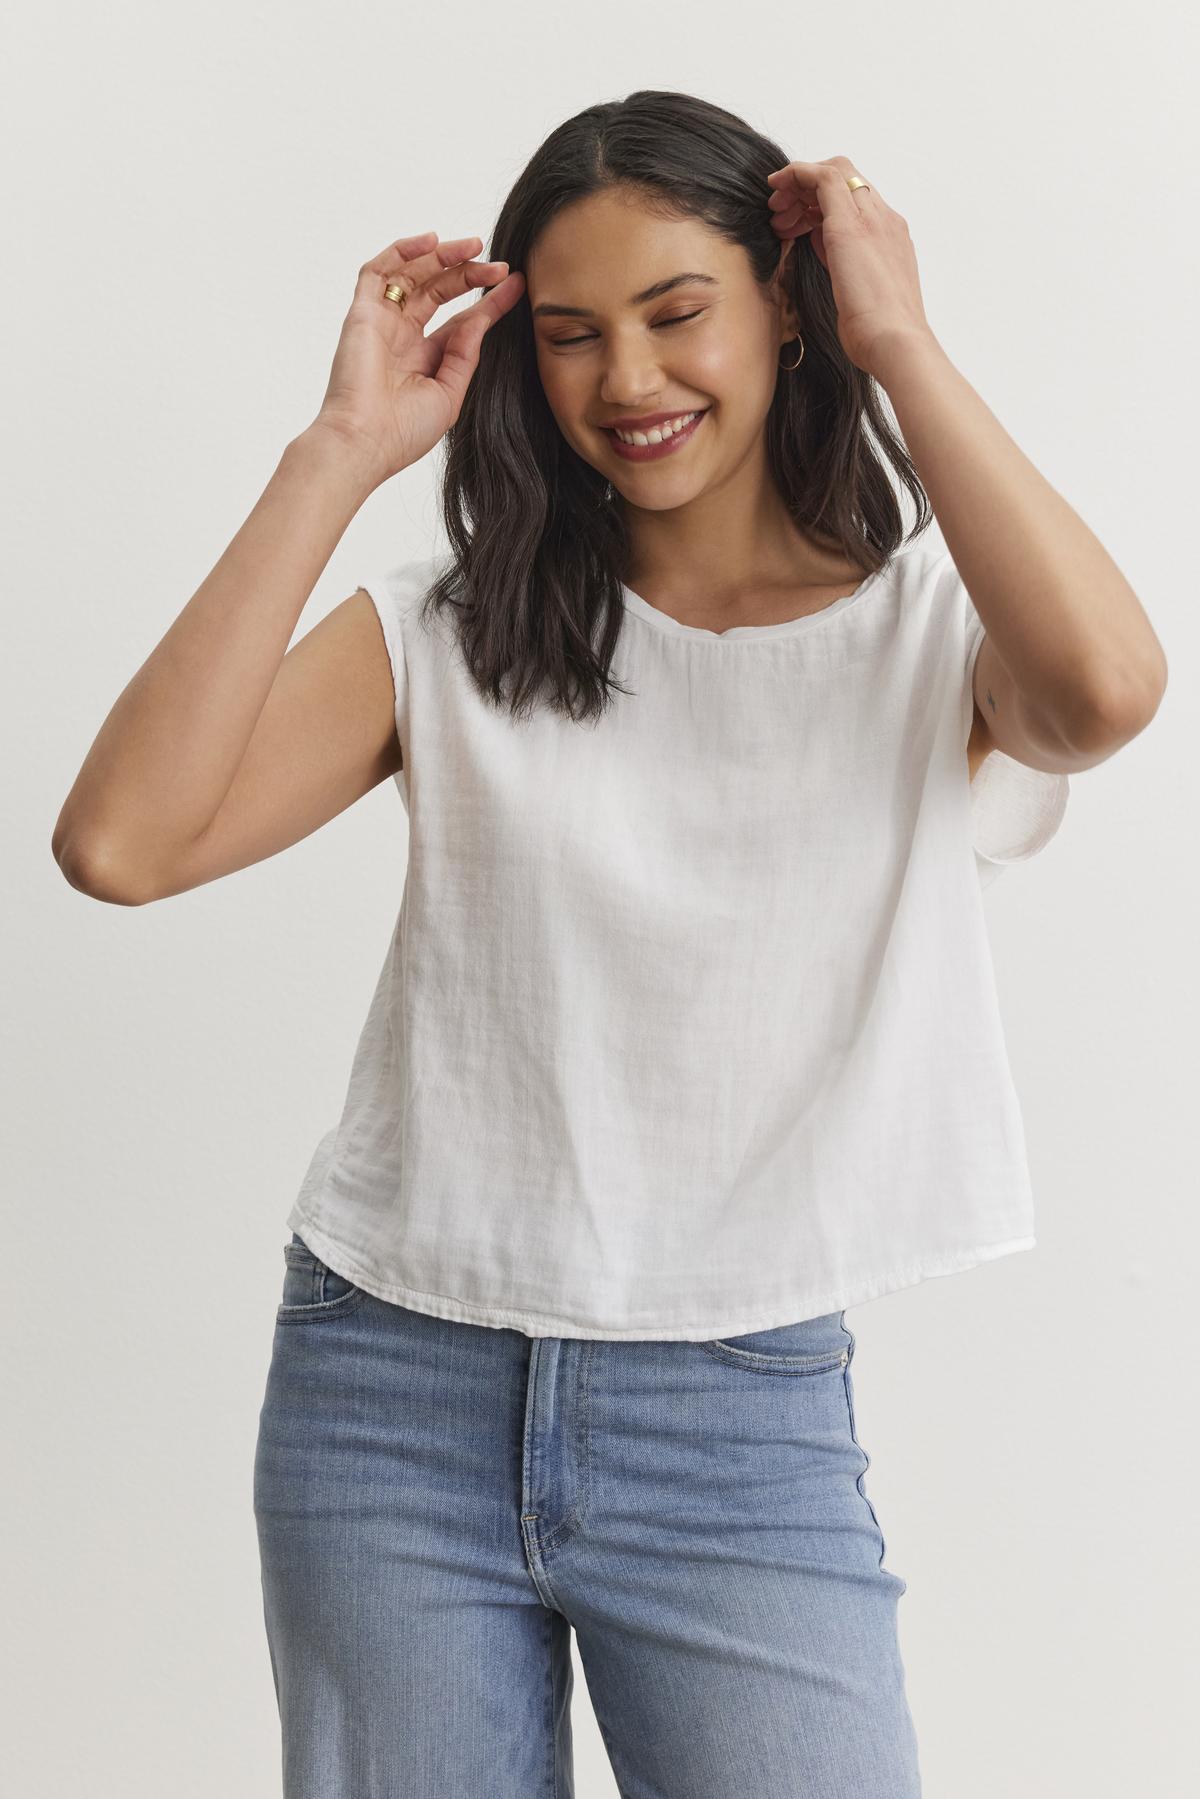   A person with long dark hair smiles while adjusting their hair, wearing a white sleeveless top and blue jeans against a plain white background. The casual basic outfit features the DANIELLA CREW NECK TEE by Velvet by Graham & Spencer, made from a lightweight cotton woven fabric that's perfect for everyday wear. 